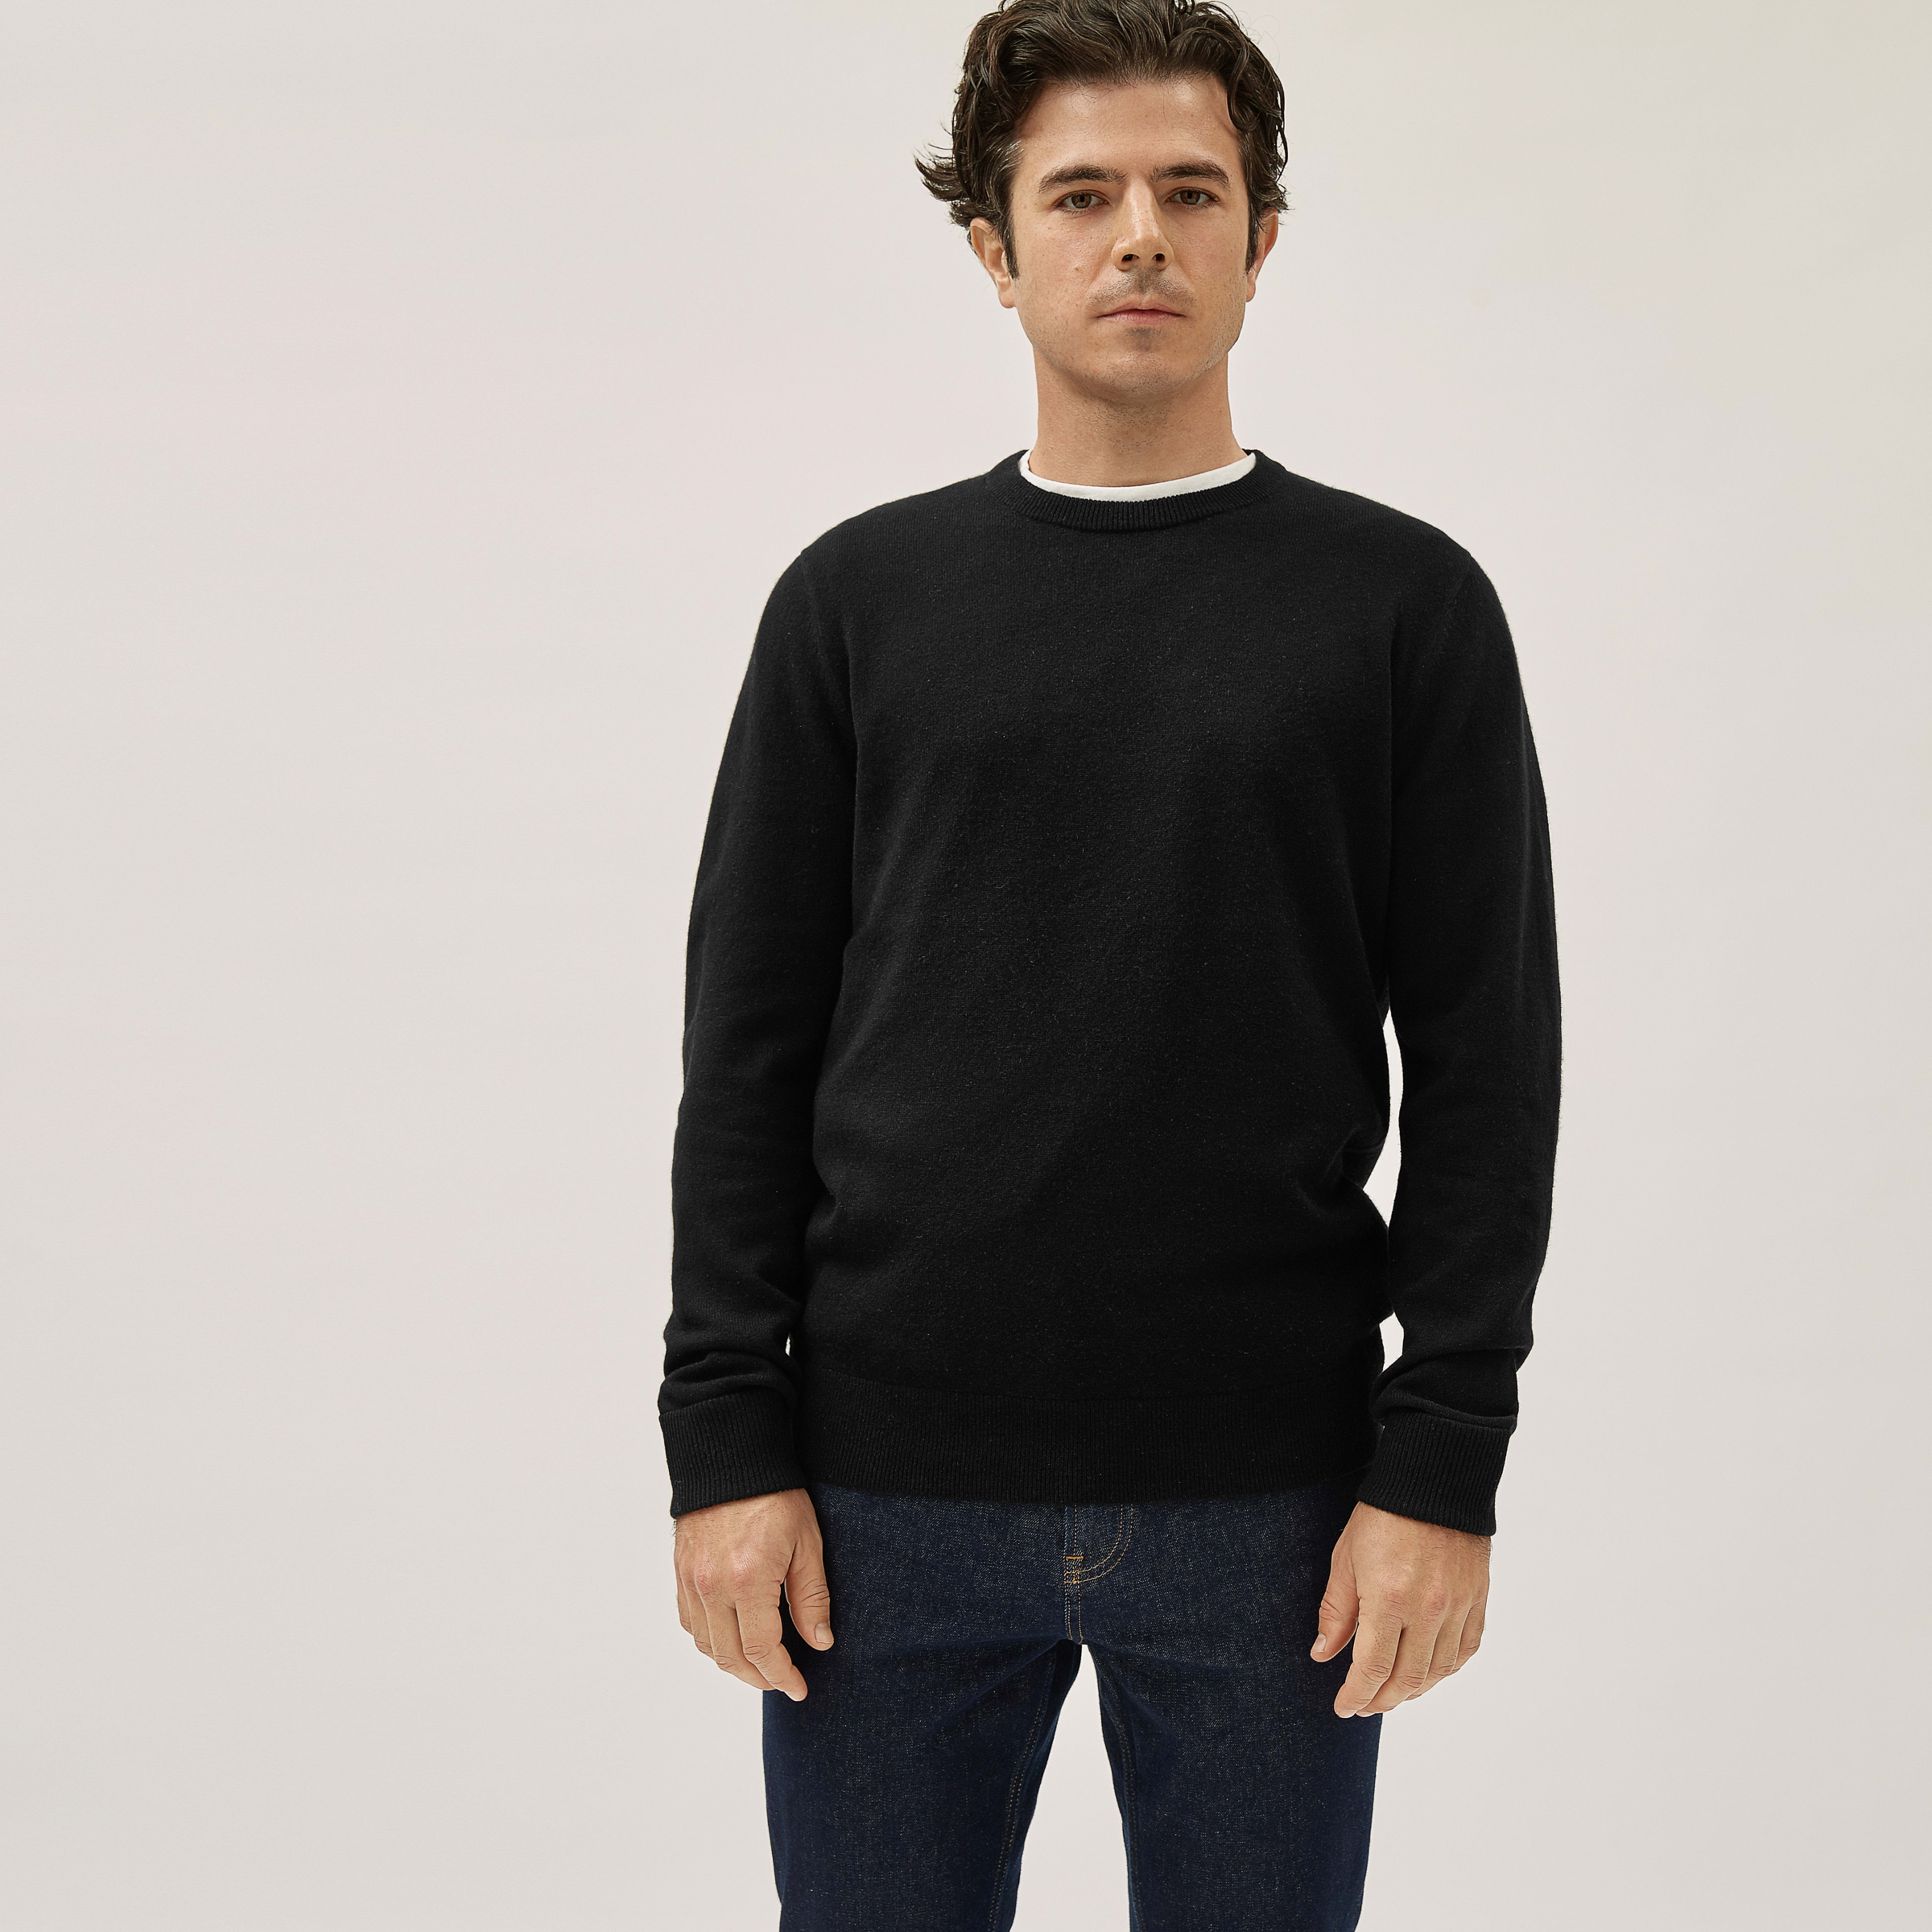 Men's Grade-A Cashmere Crew Sweater by Everlane in Black, Size XL